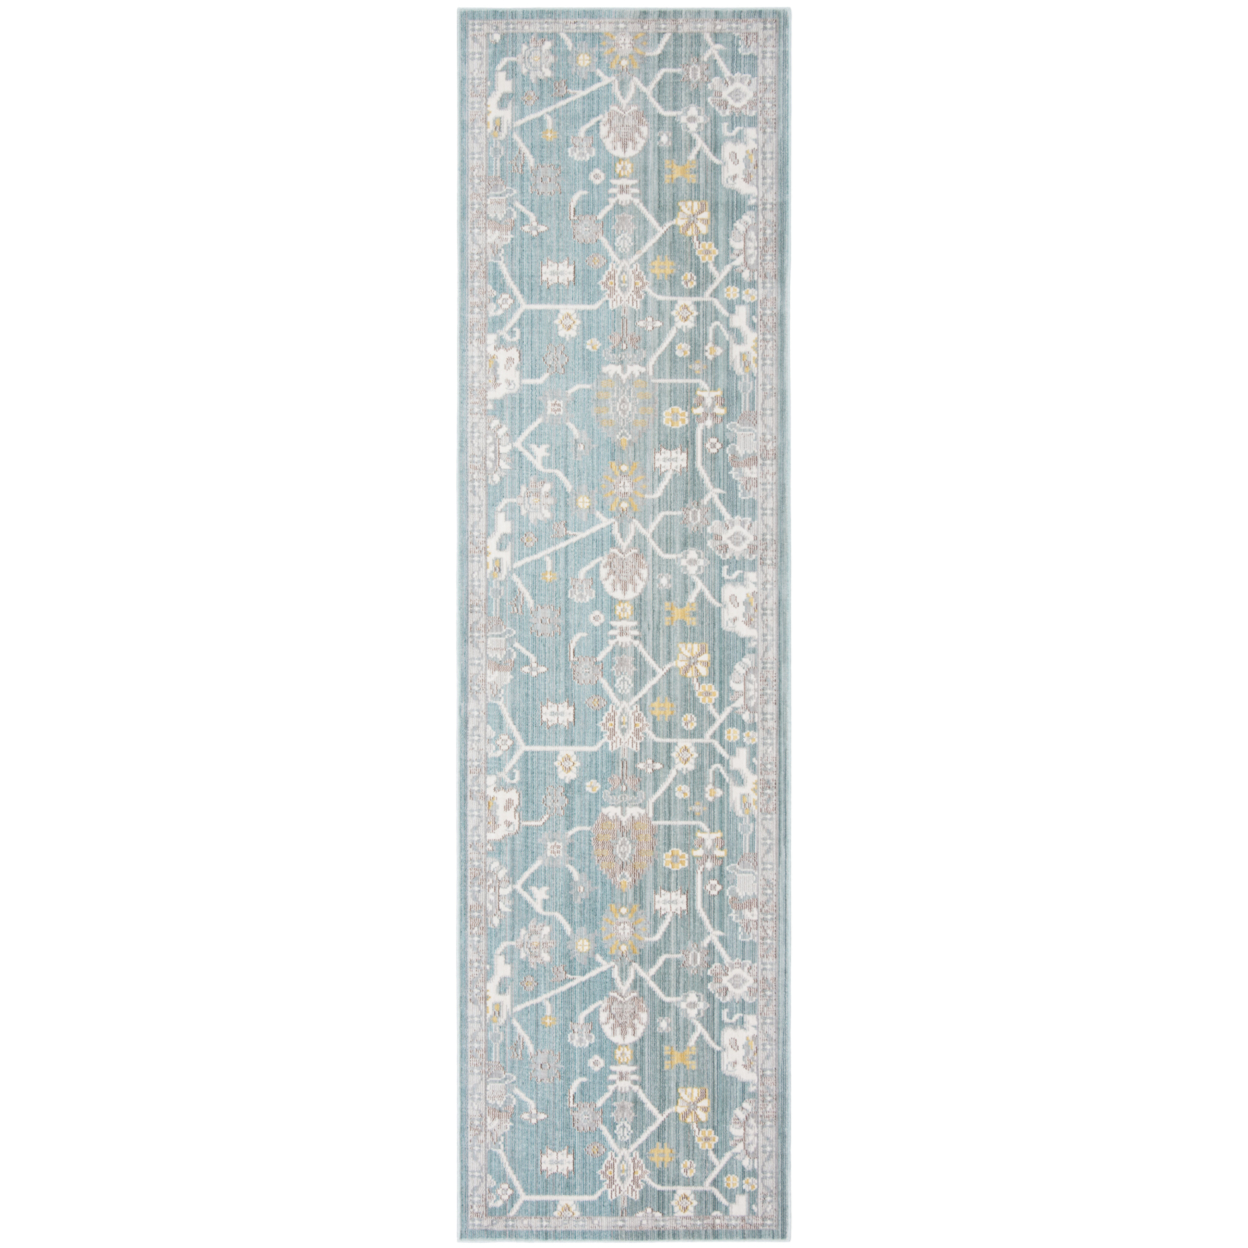 SAFAVIEH Valencia Collection VAL116S Steel Blue Rug - 8' X 10'